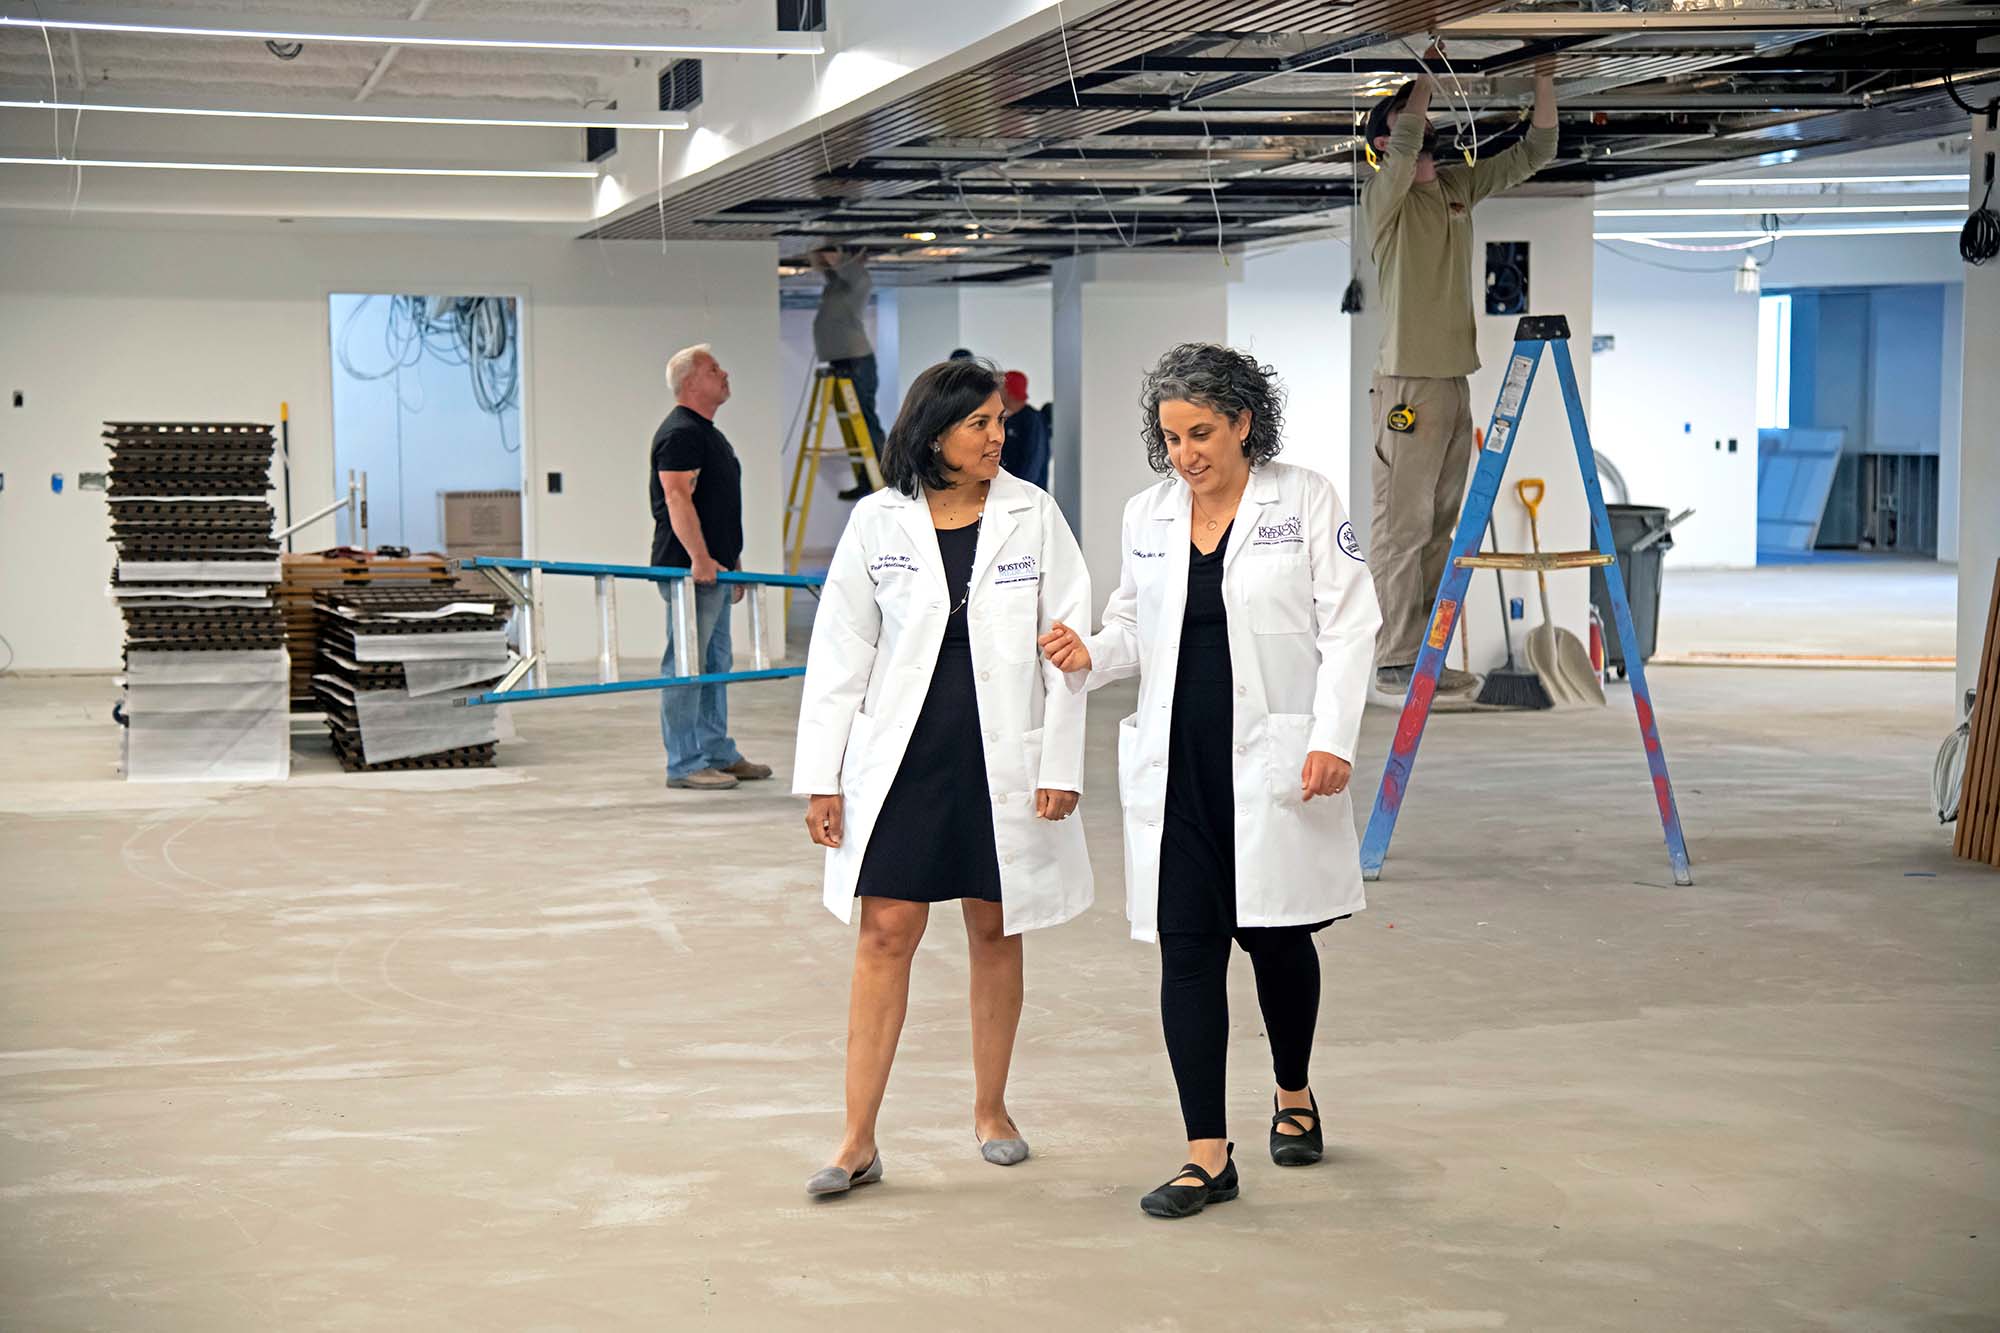 Photo of Priya Garg (left), MED associate dean for medical education, and Molly Cohen-Osher, MED assistant dean, touring the new Learning Center during construction earlier this summer. Two women wearing white lab coats chat and walk through a room under construction.